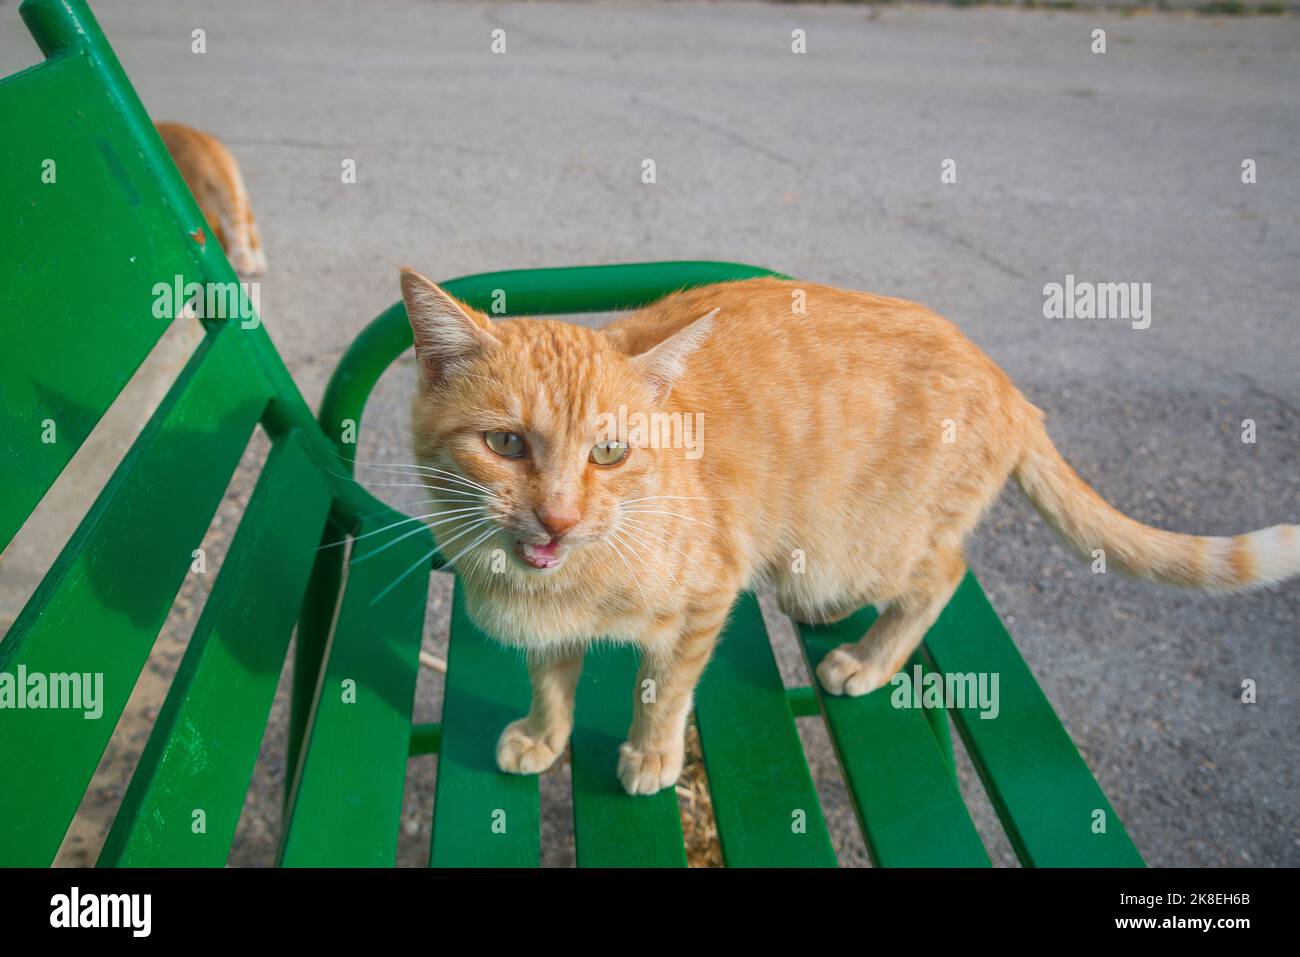 Tabby cat meowing. Stock Photo